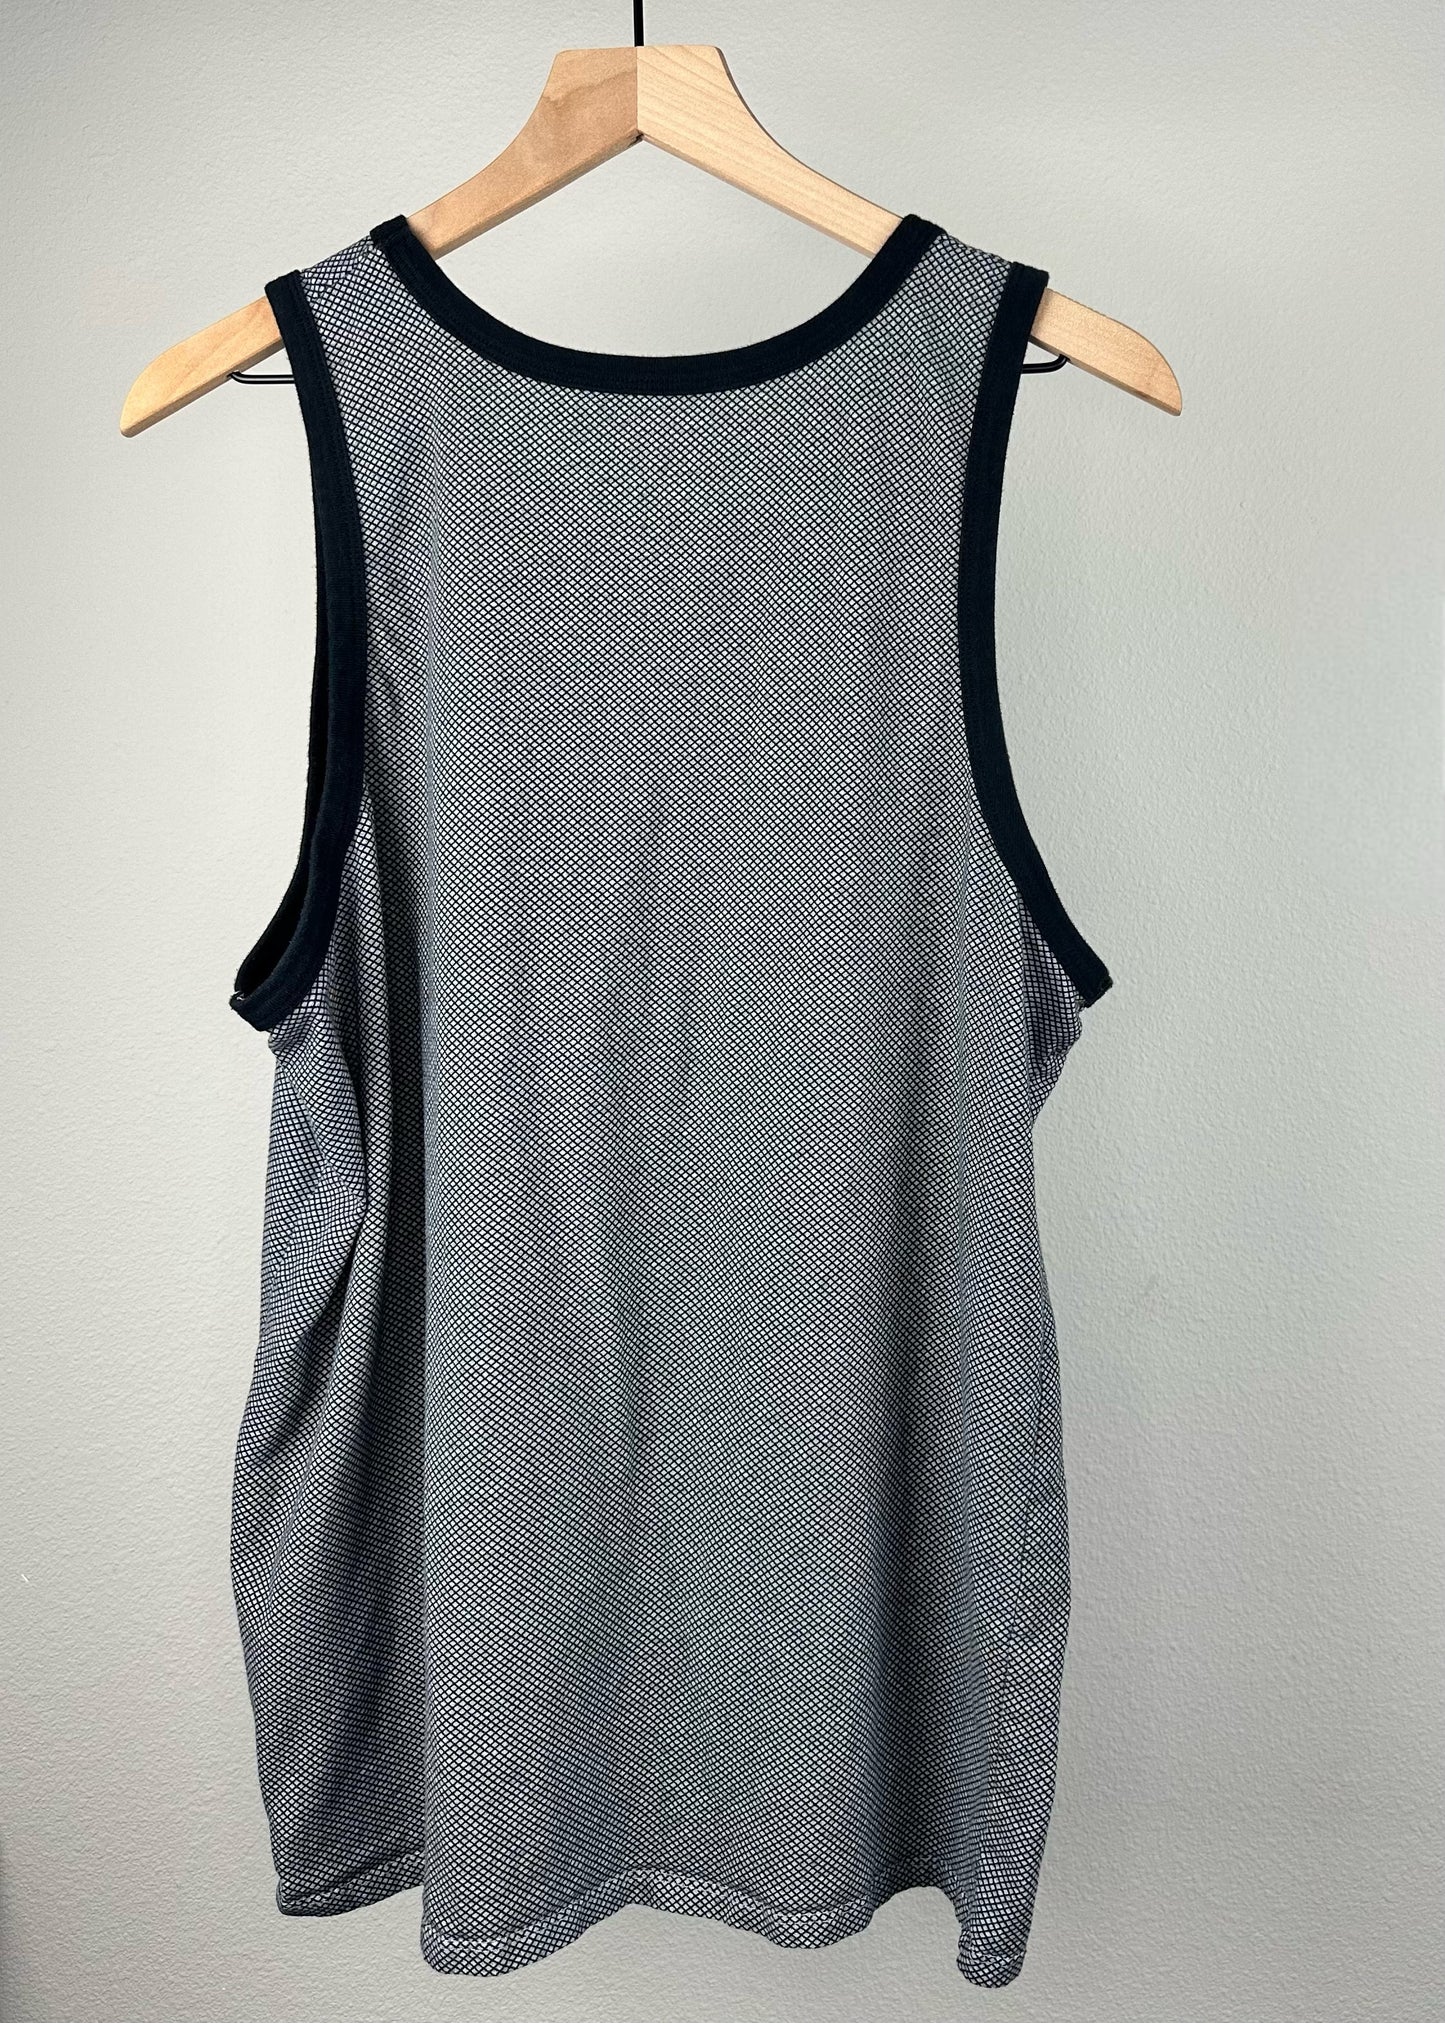 Grey and Black Tank Top By Nike